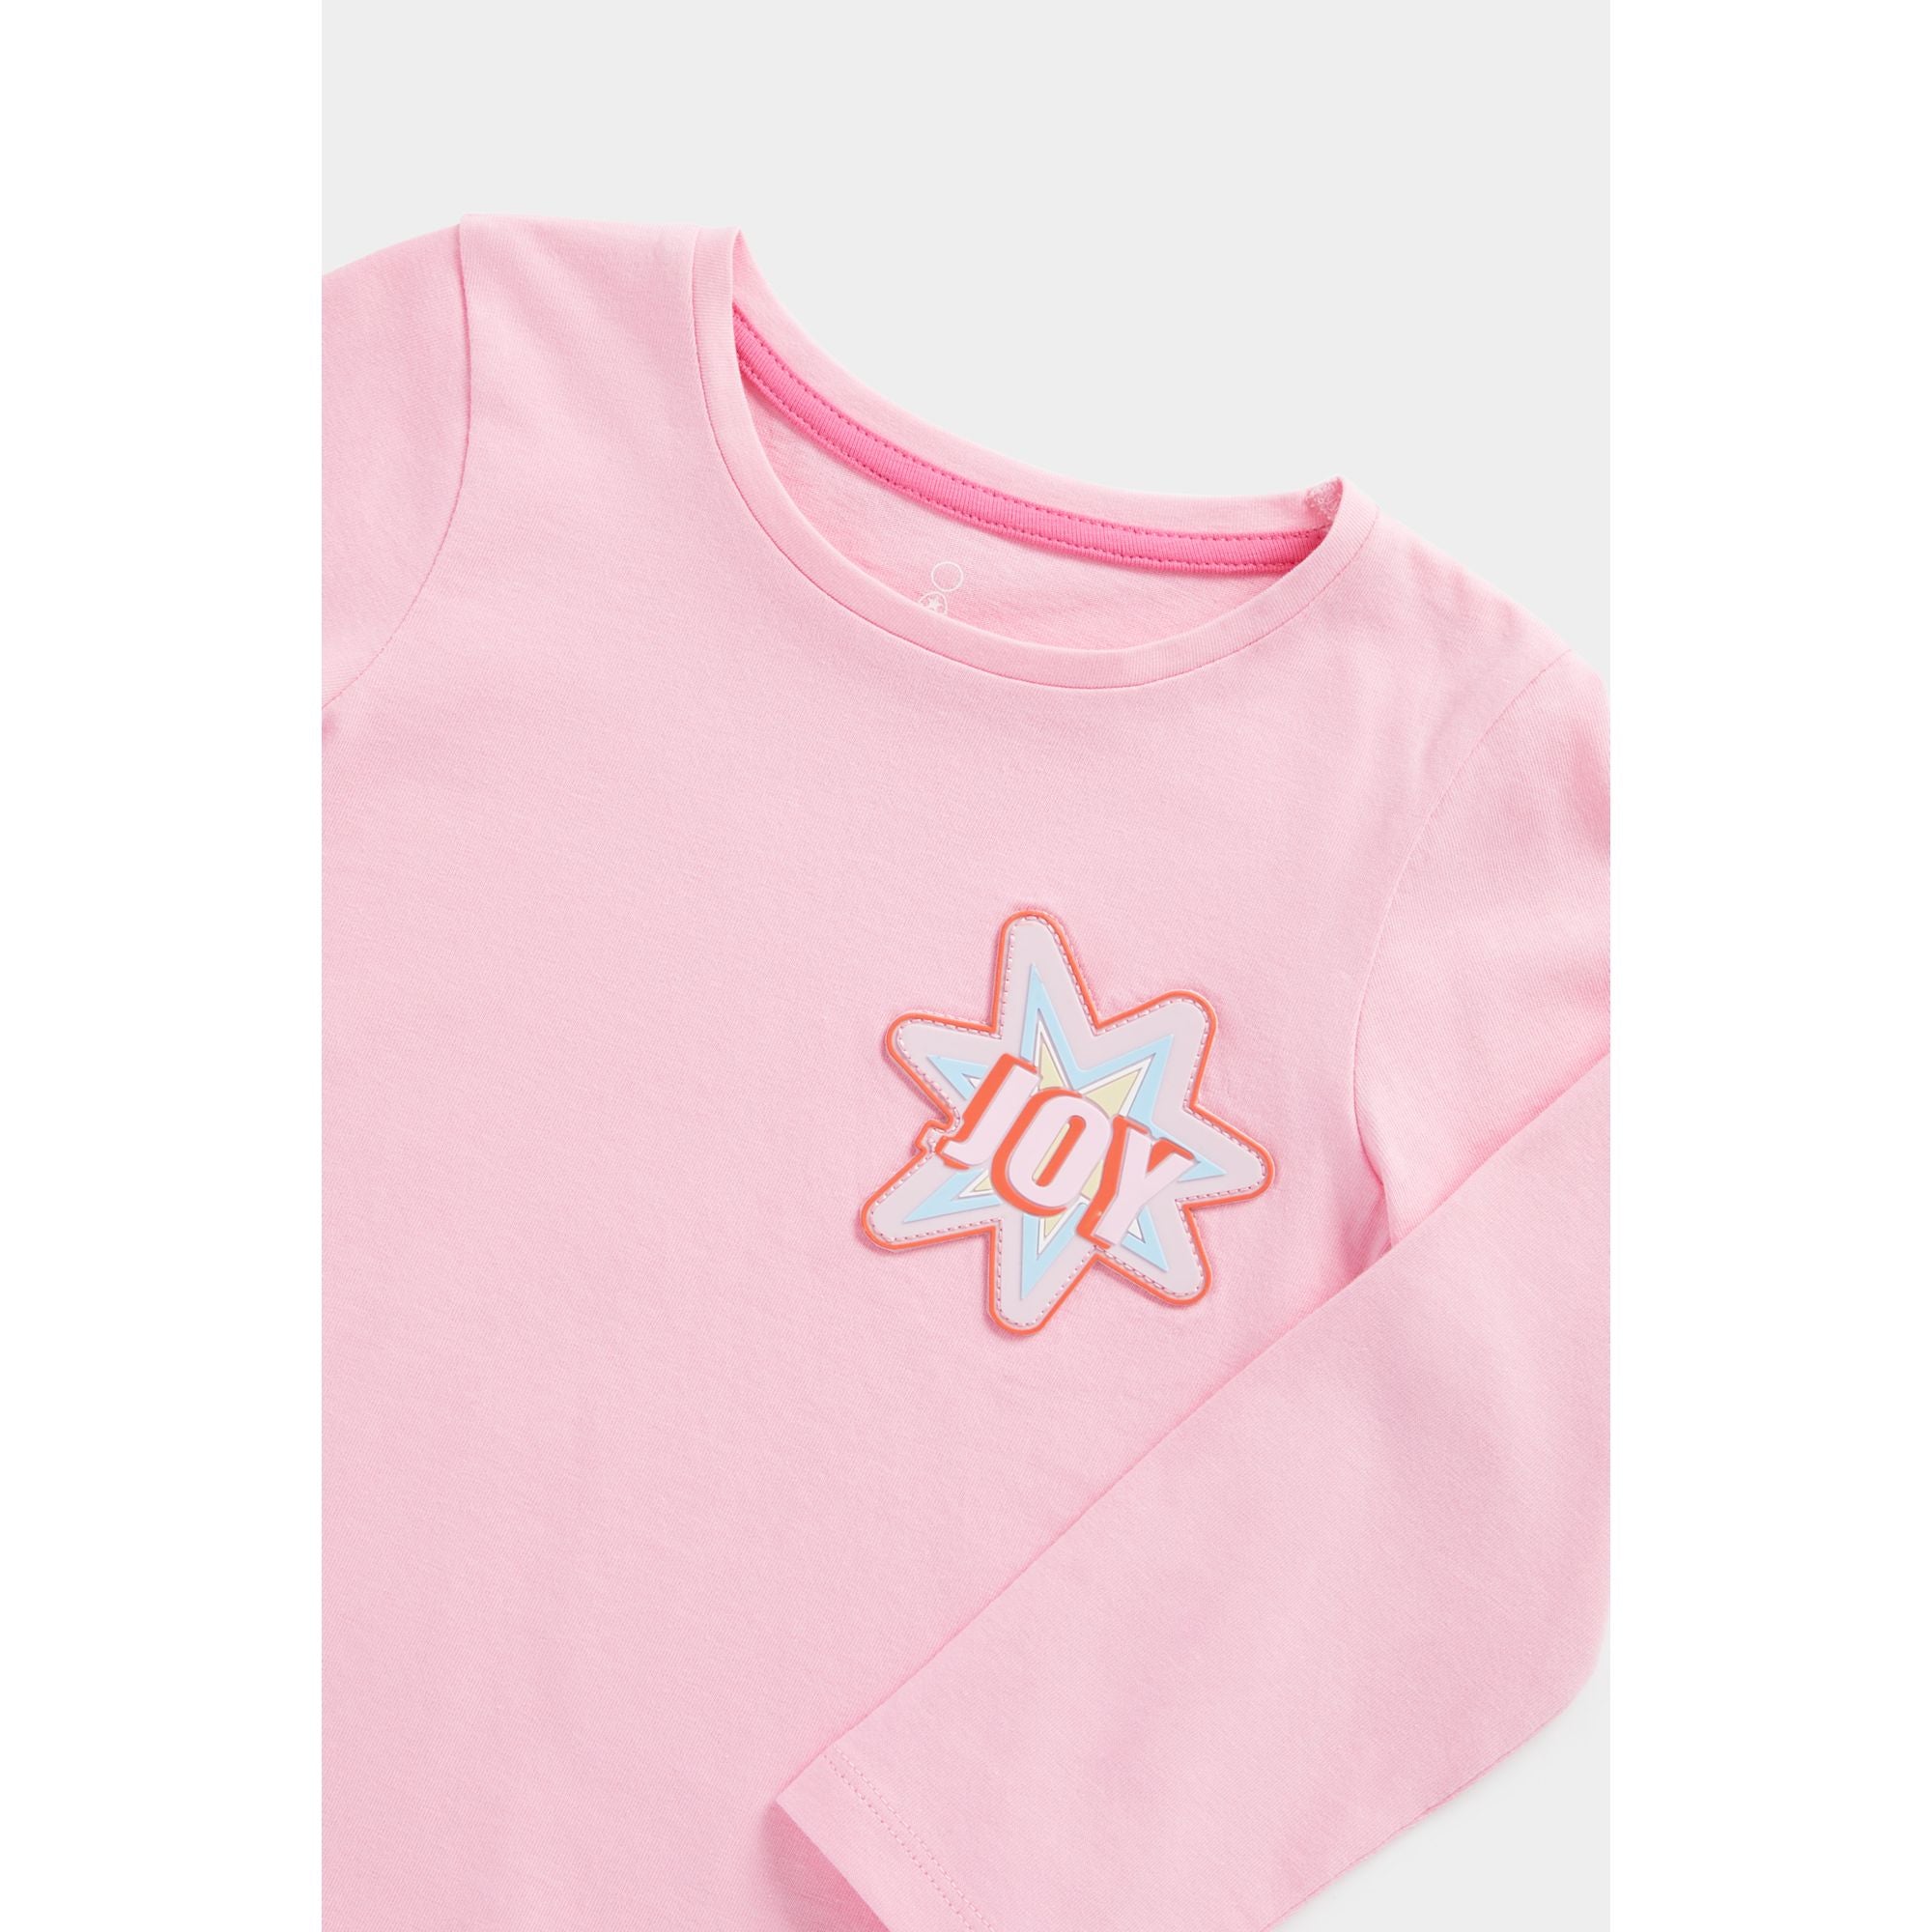 Mothercare Playful Long-Sleeved T-Shirts - 3 Pack